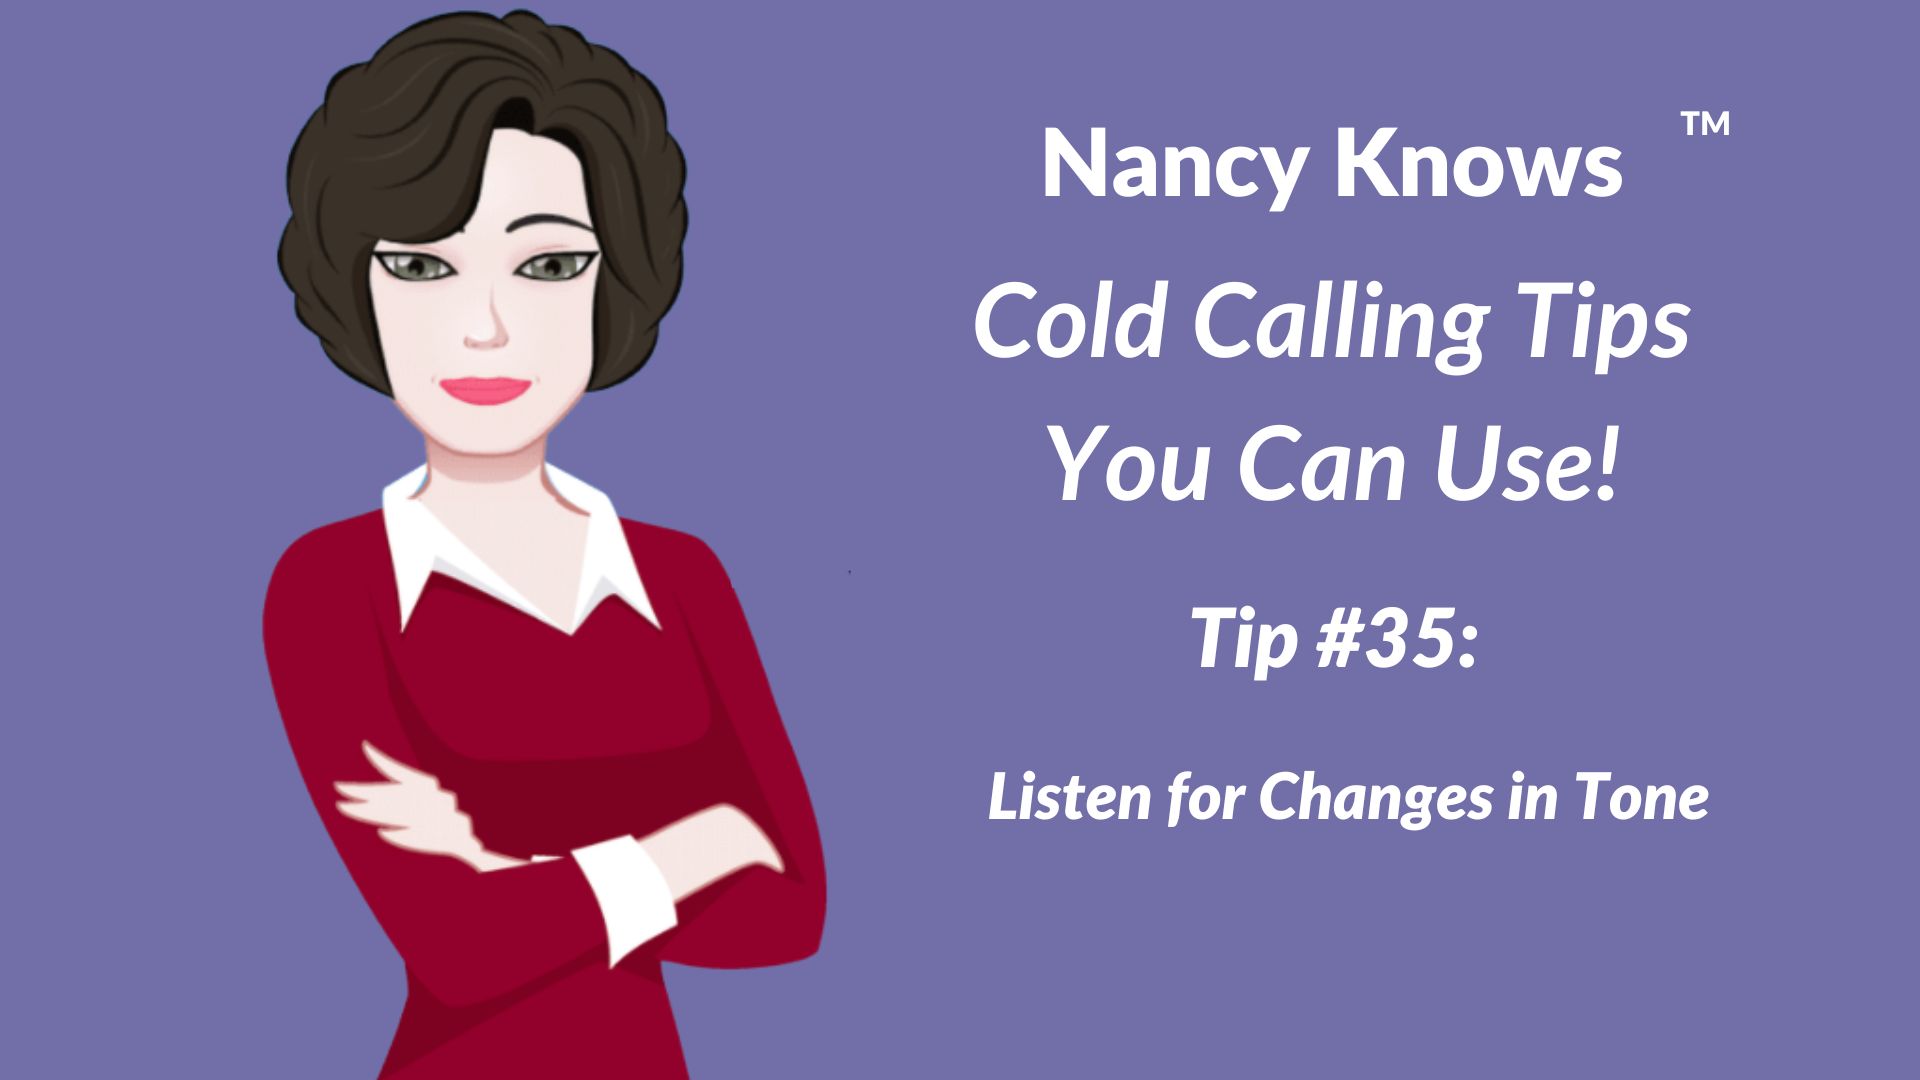 Nancy Knows #35: Listen for Changes in Tone